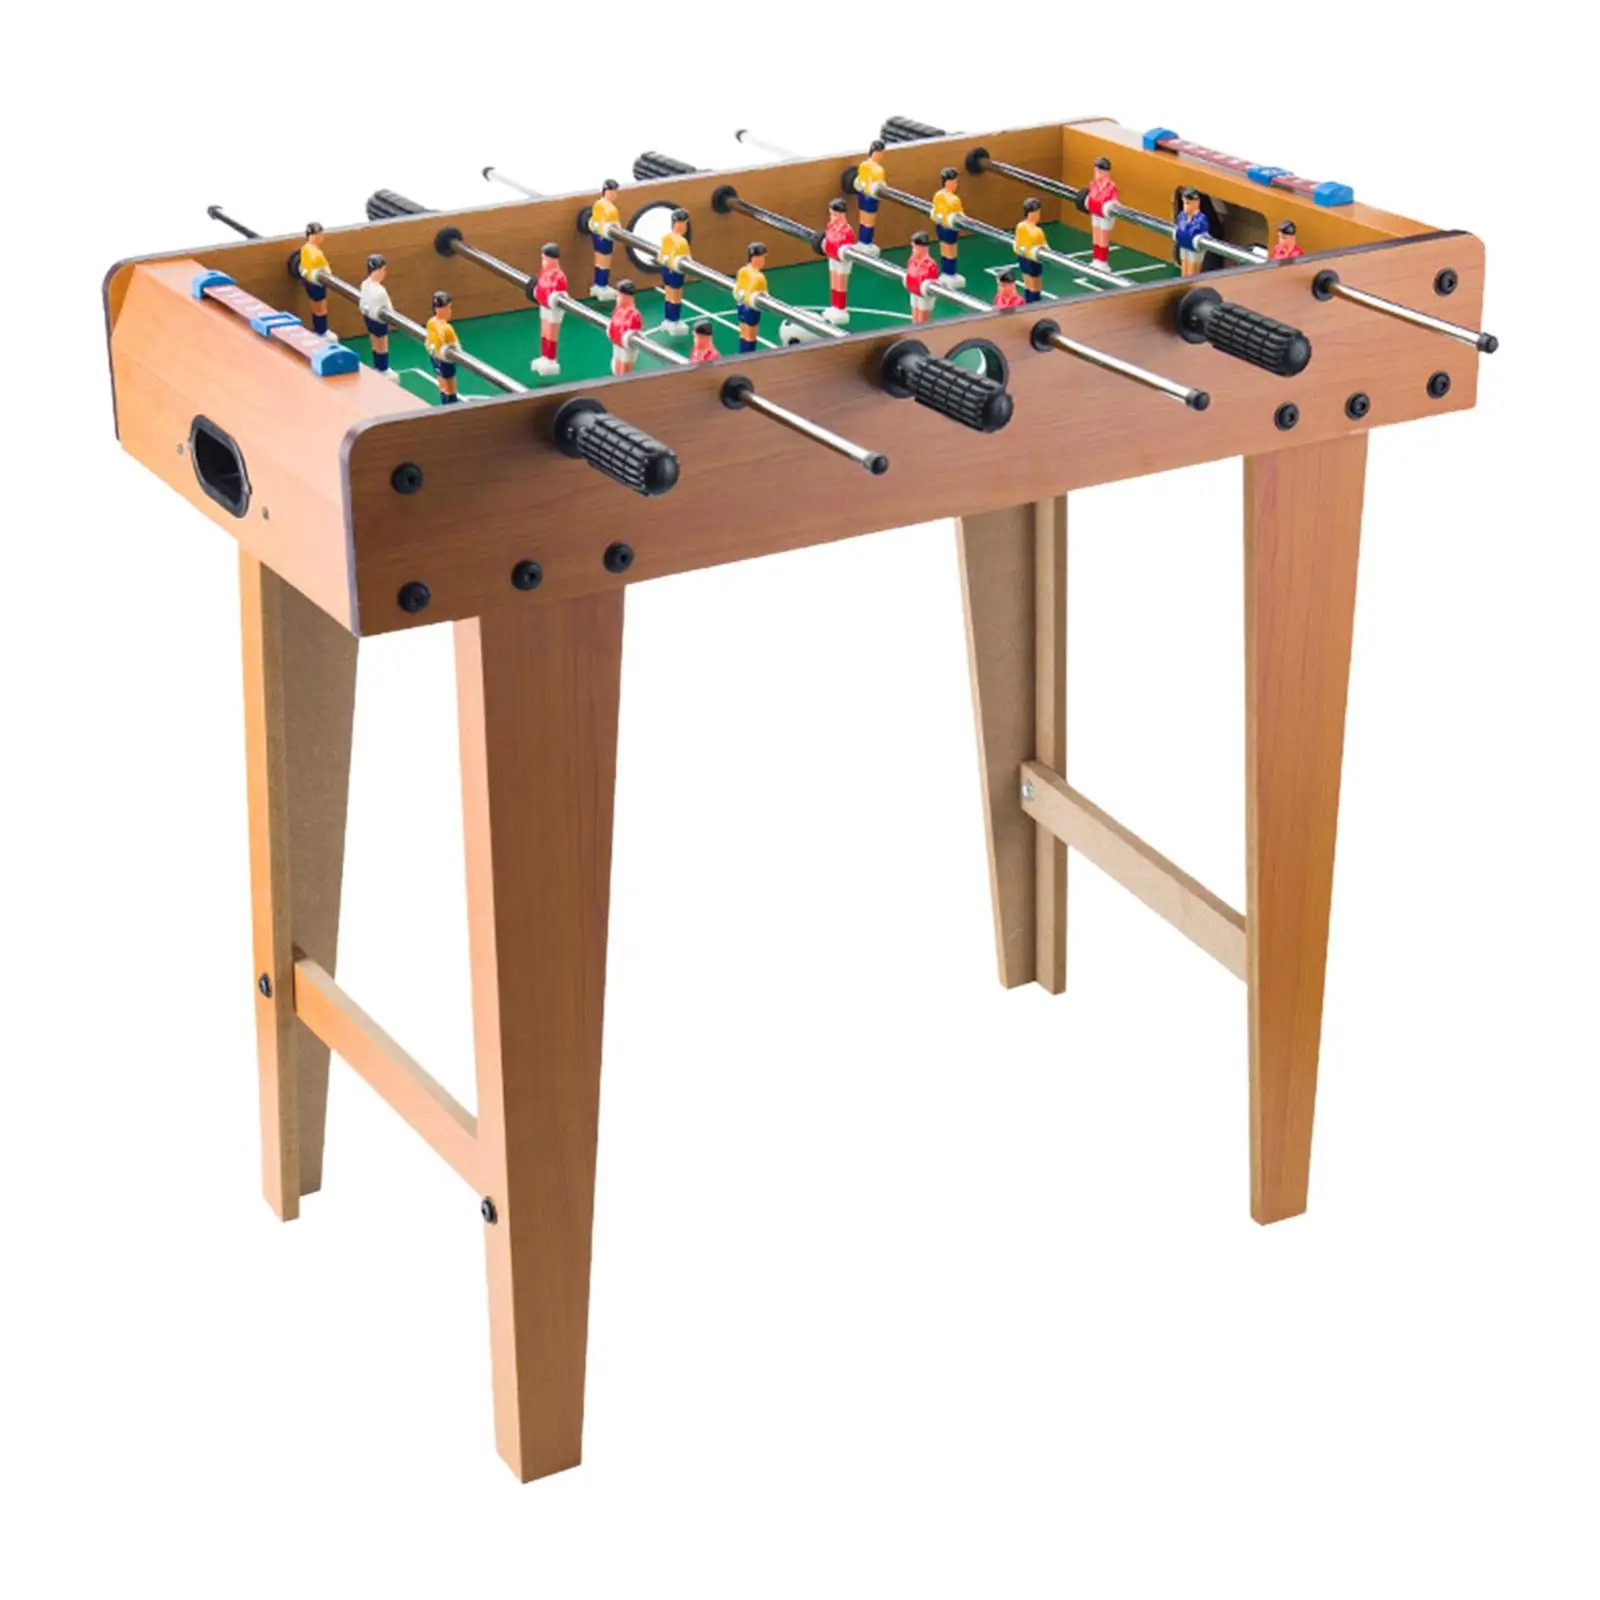 

Wooden Foosball Table Tabletop Soccer Game Parent Child Interactive Toy Sports Desktop Game for Outdoor Adults Family Kids